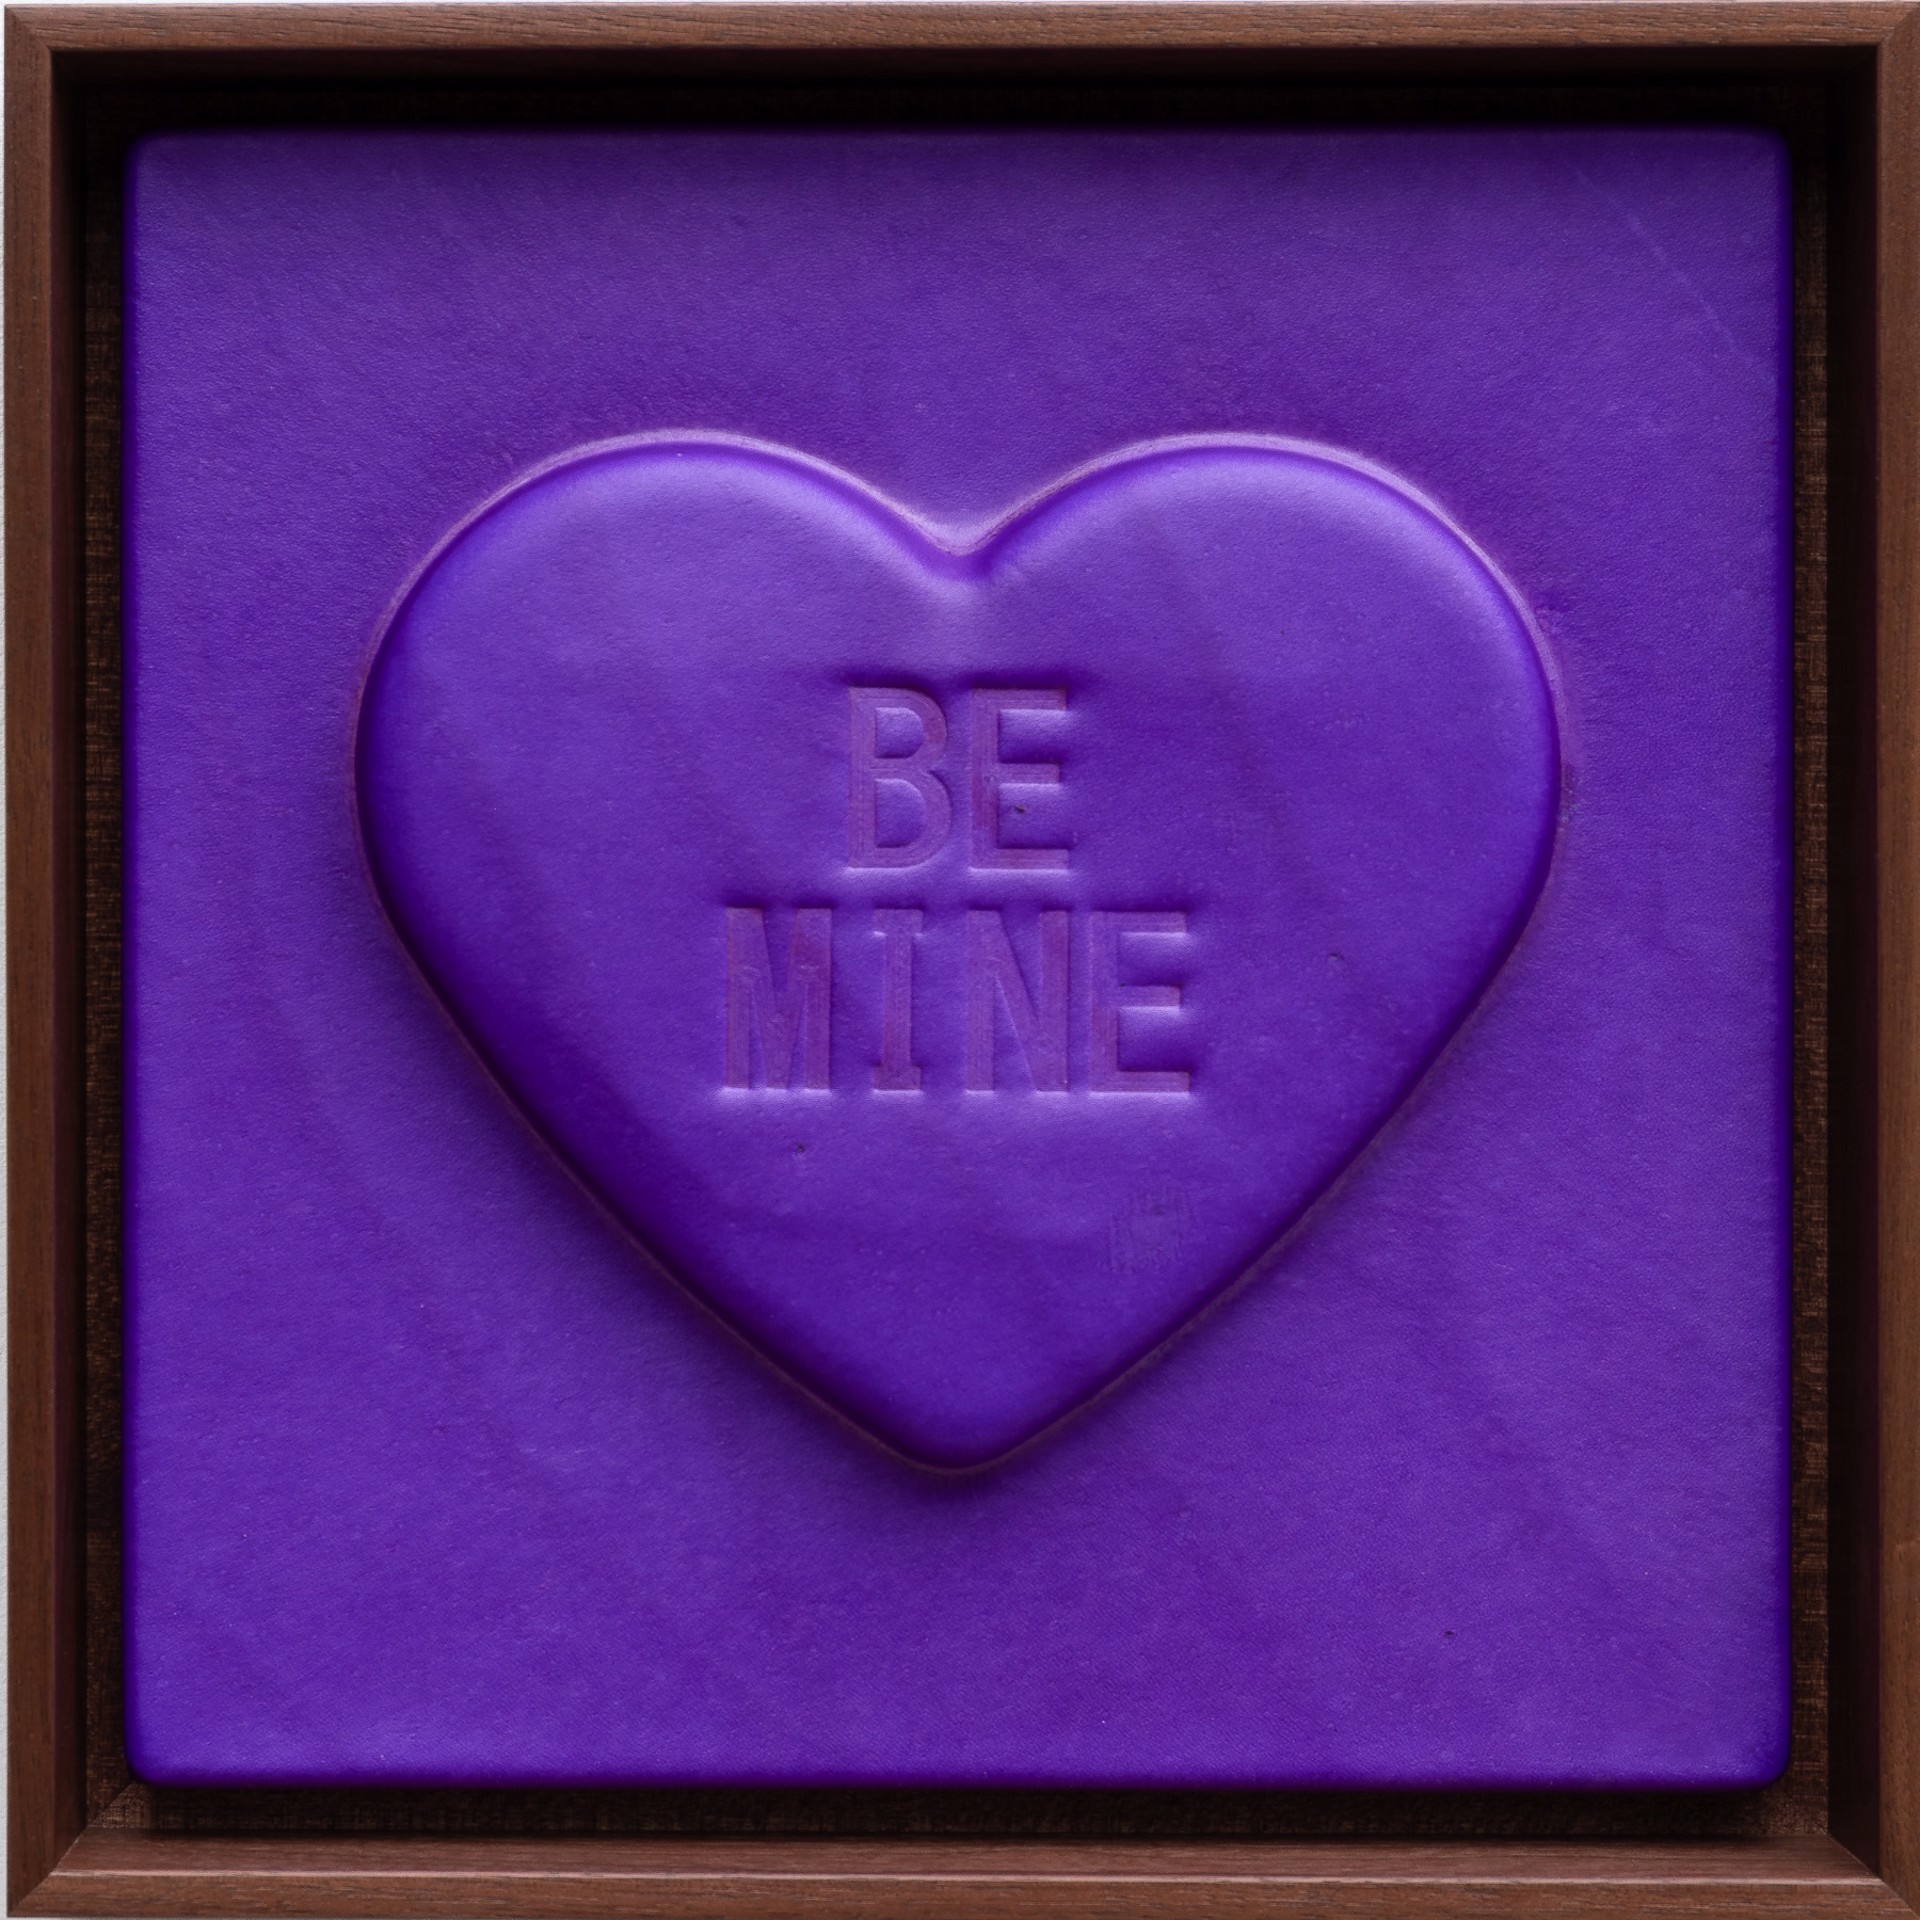 'BE MINE' - Sweetheart series by Mx. Hyde